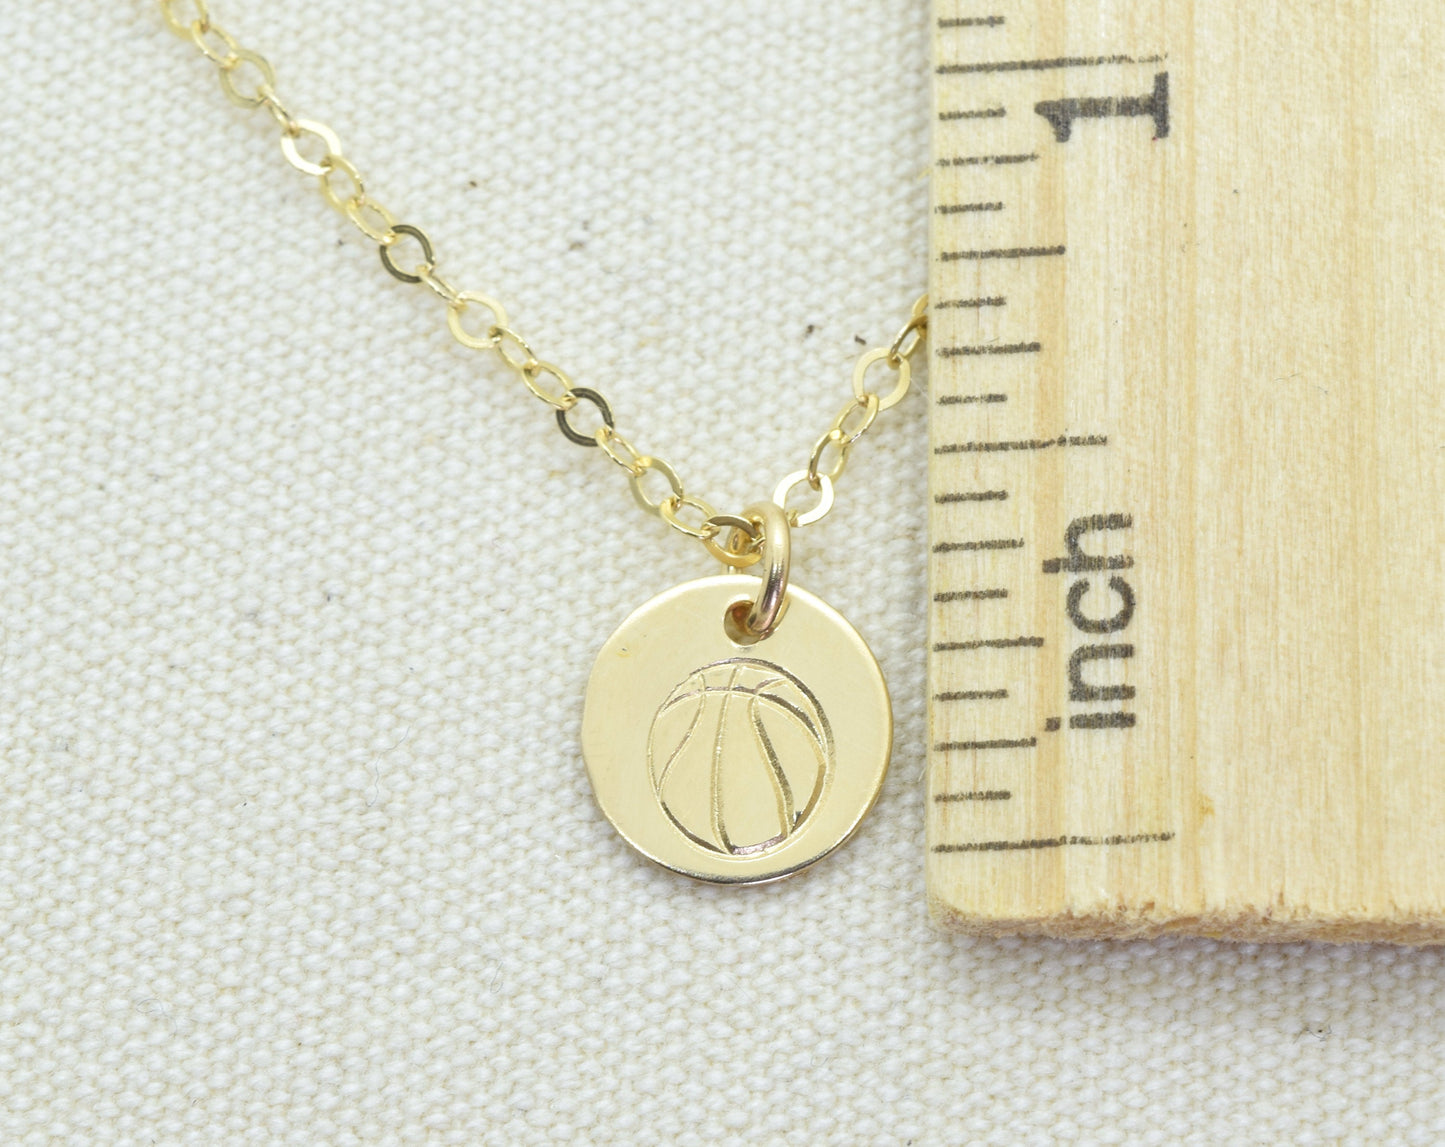 Gold Filled Basketball Charm Necklace